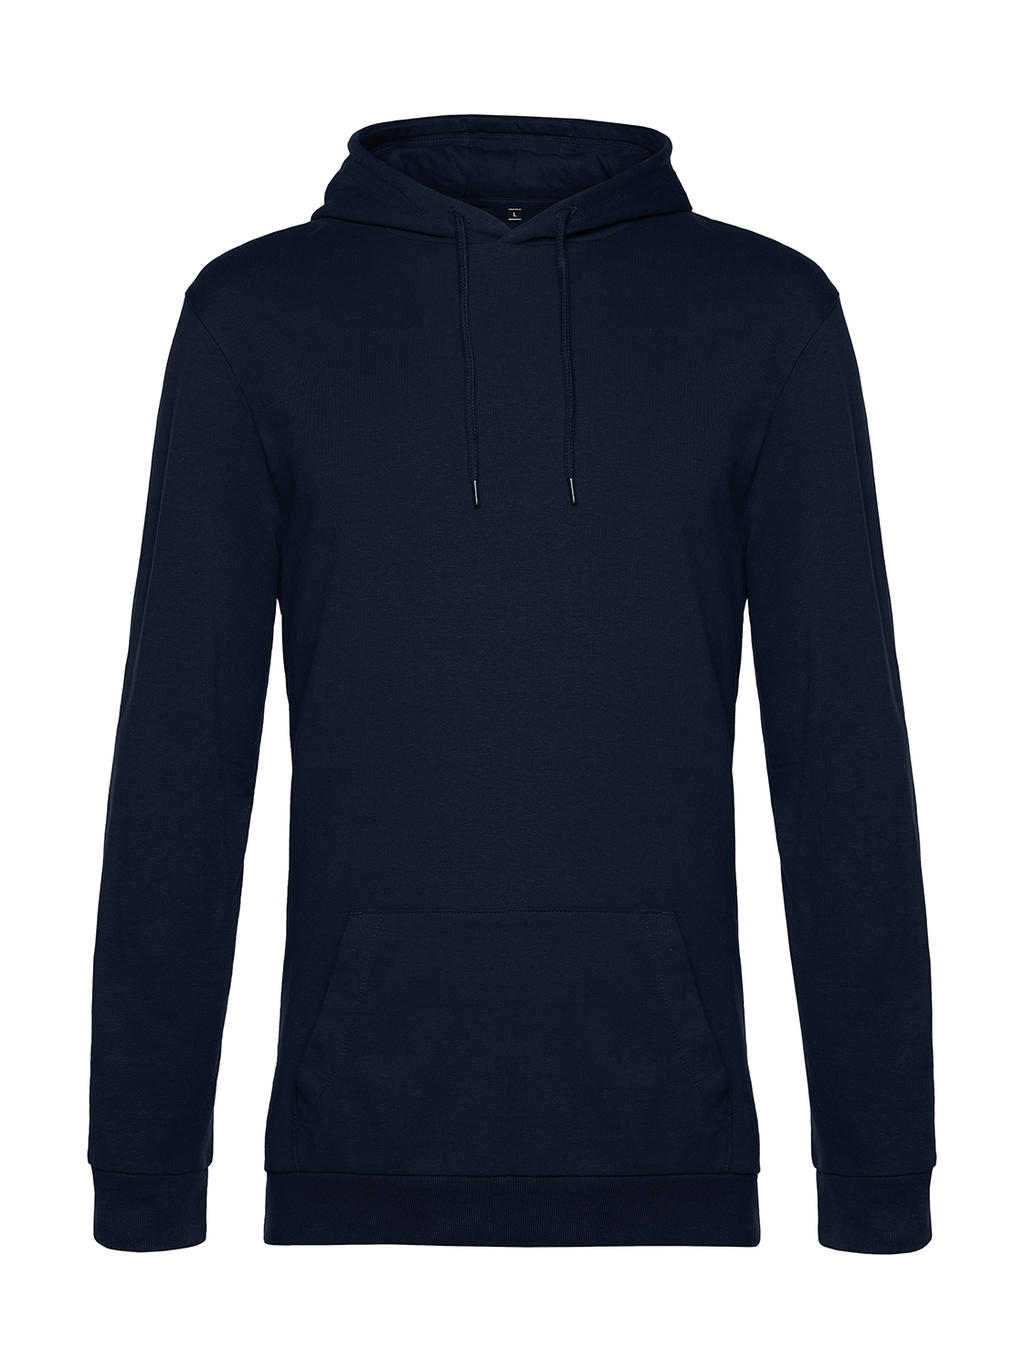  #Hoodie French Terry in Farbe Navy Blue